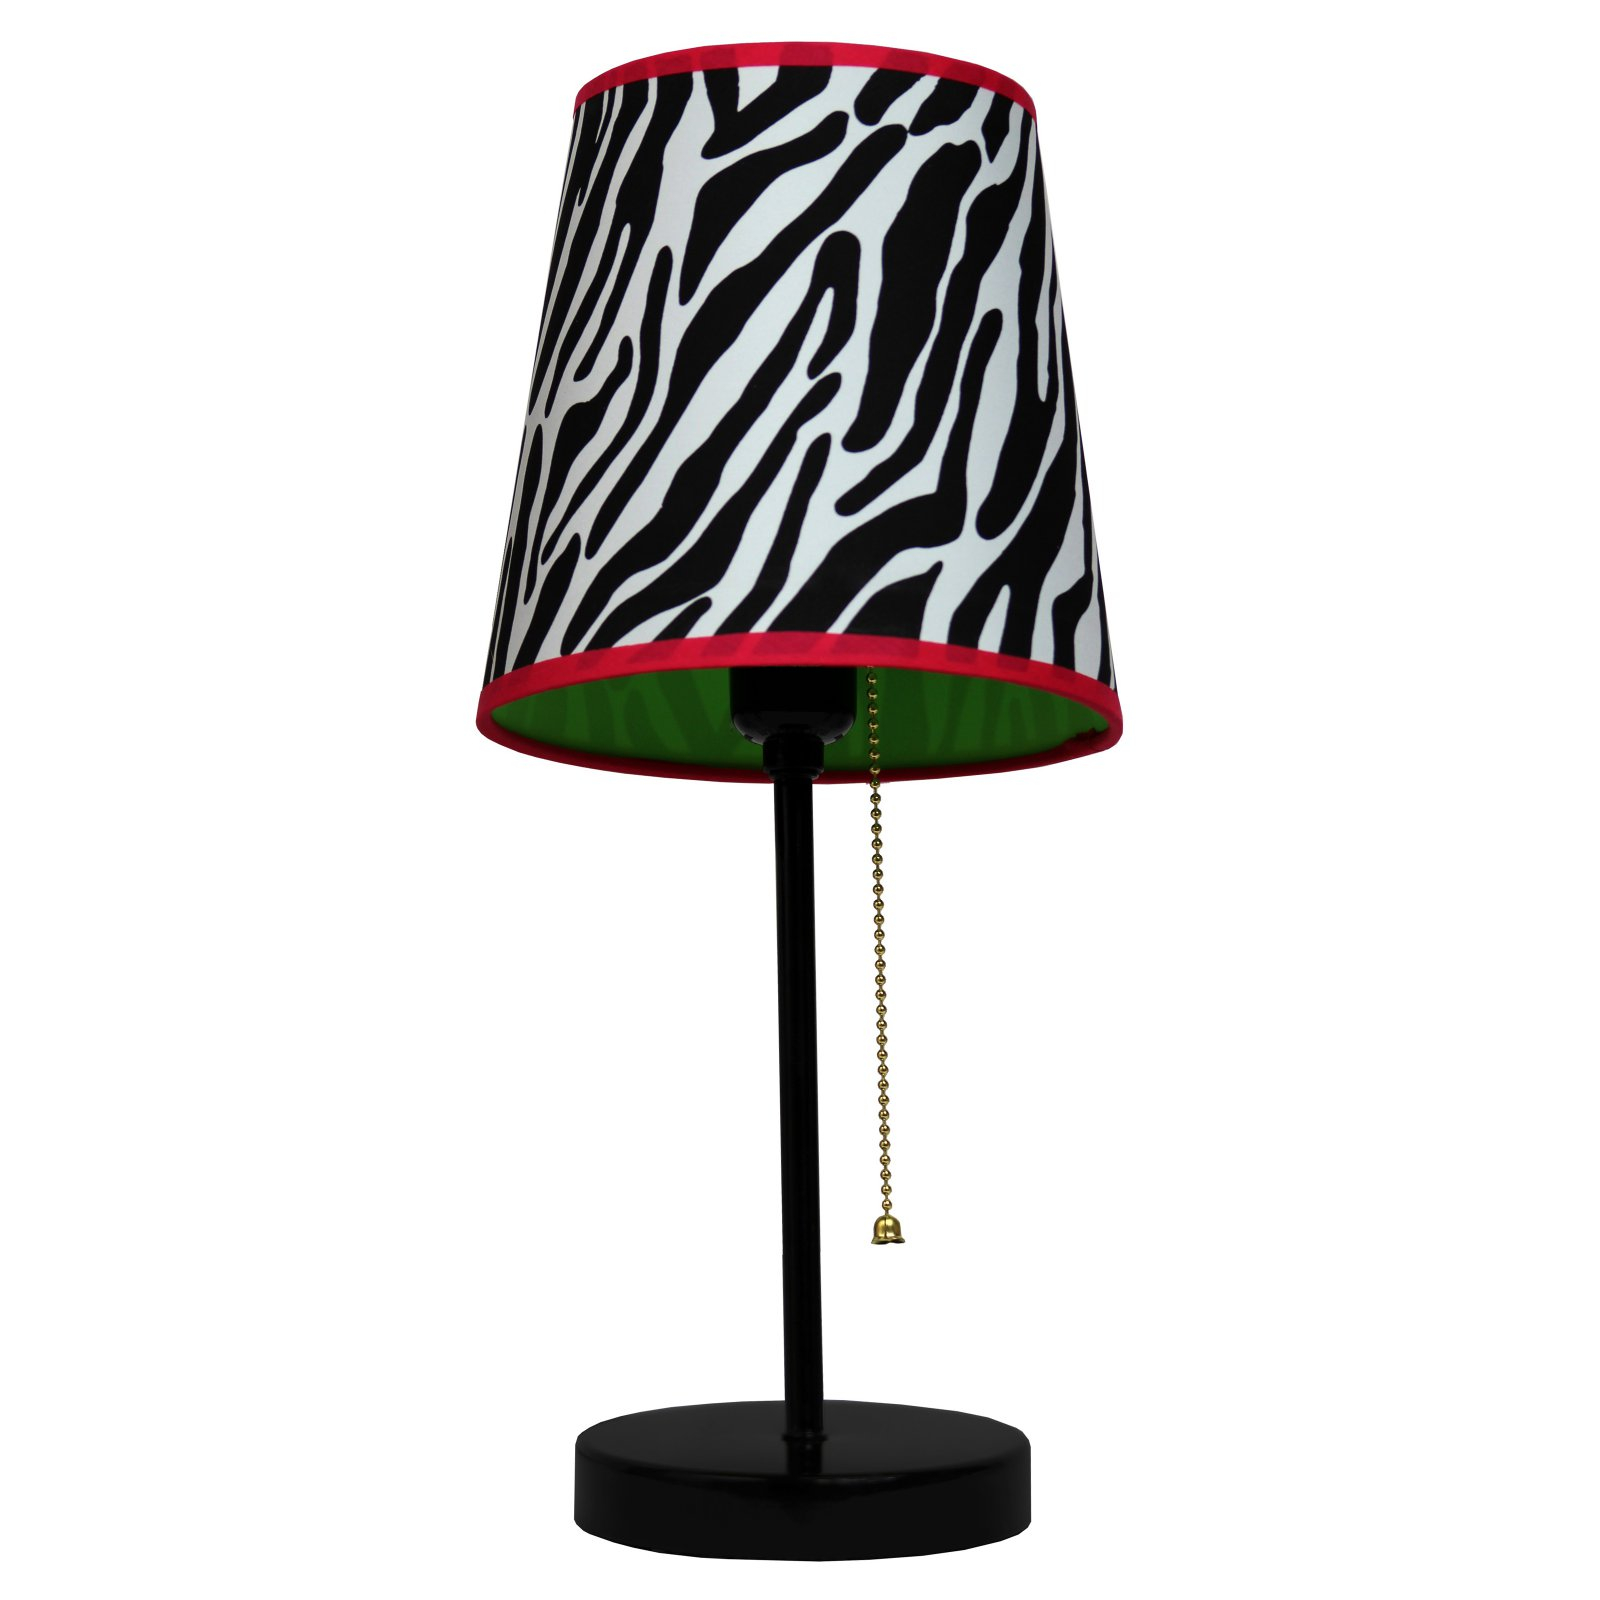 Limelights Table Lamp Zebra Print Shade Products In 2019 pertaining to measurements 1600 X 1600